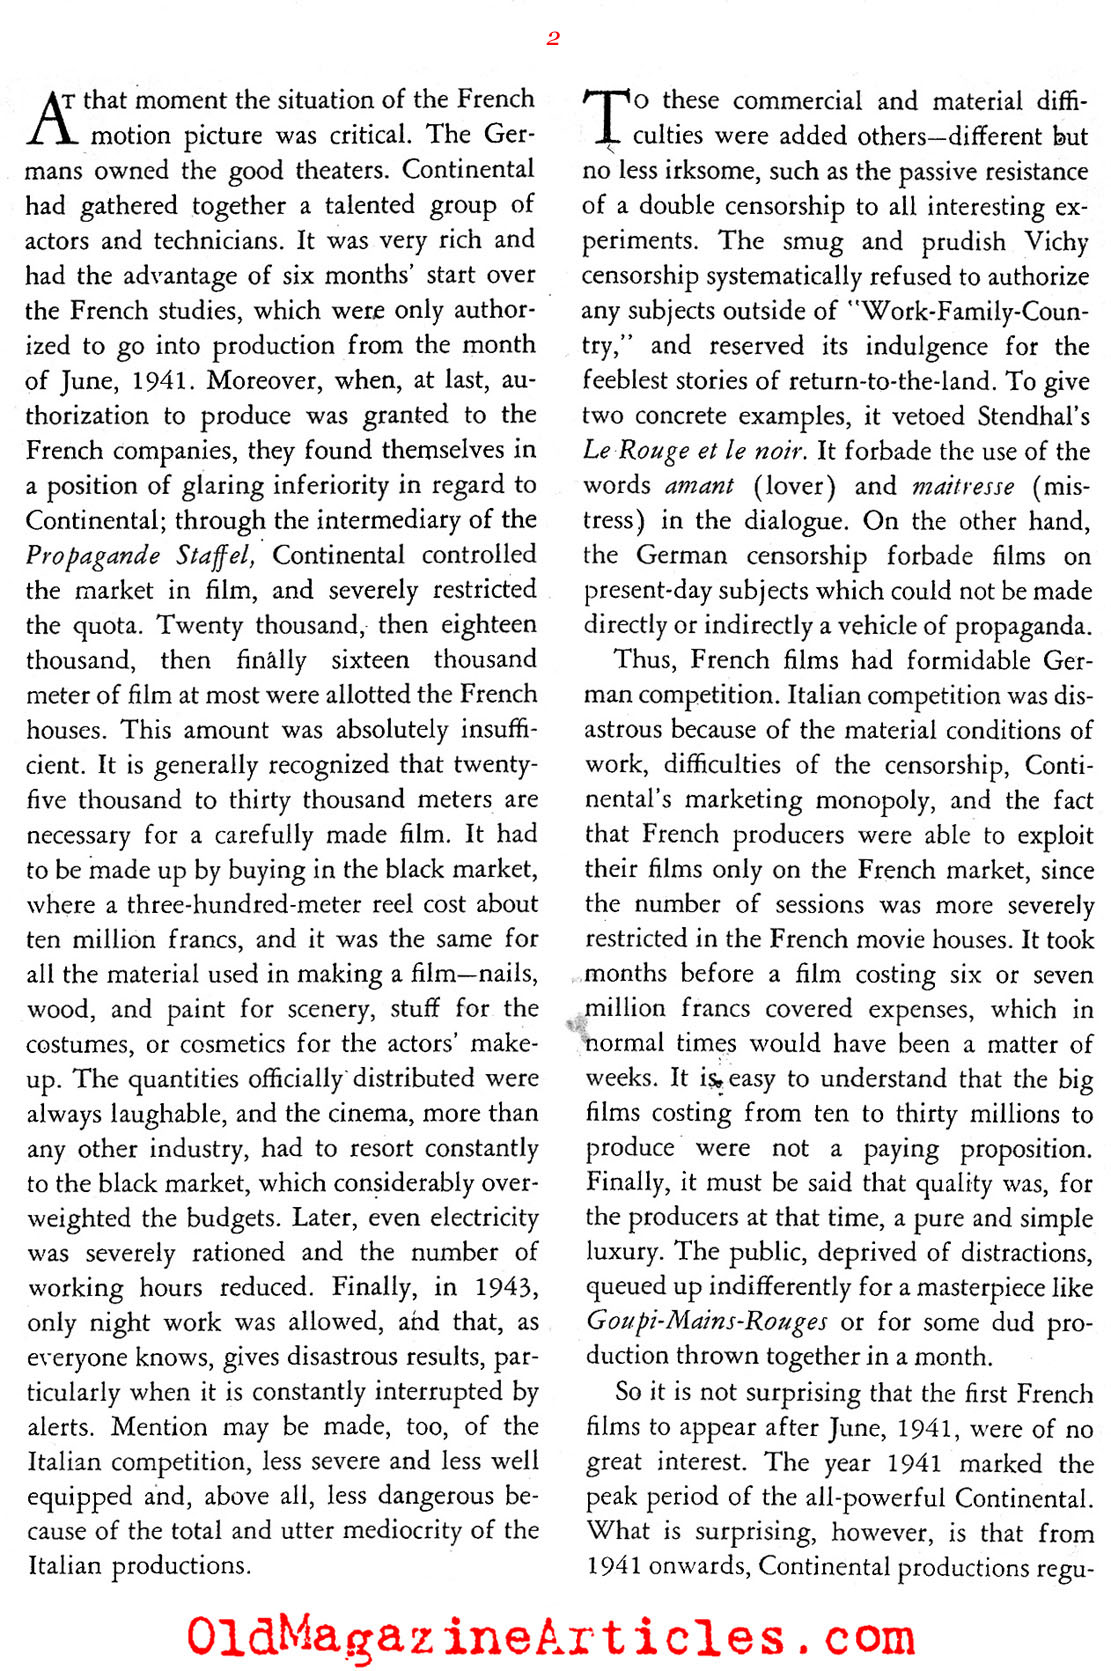 The French Film Industry: 1940 - 1944 (Tricolor Magazine, 1944)